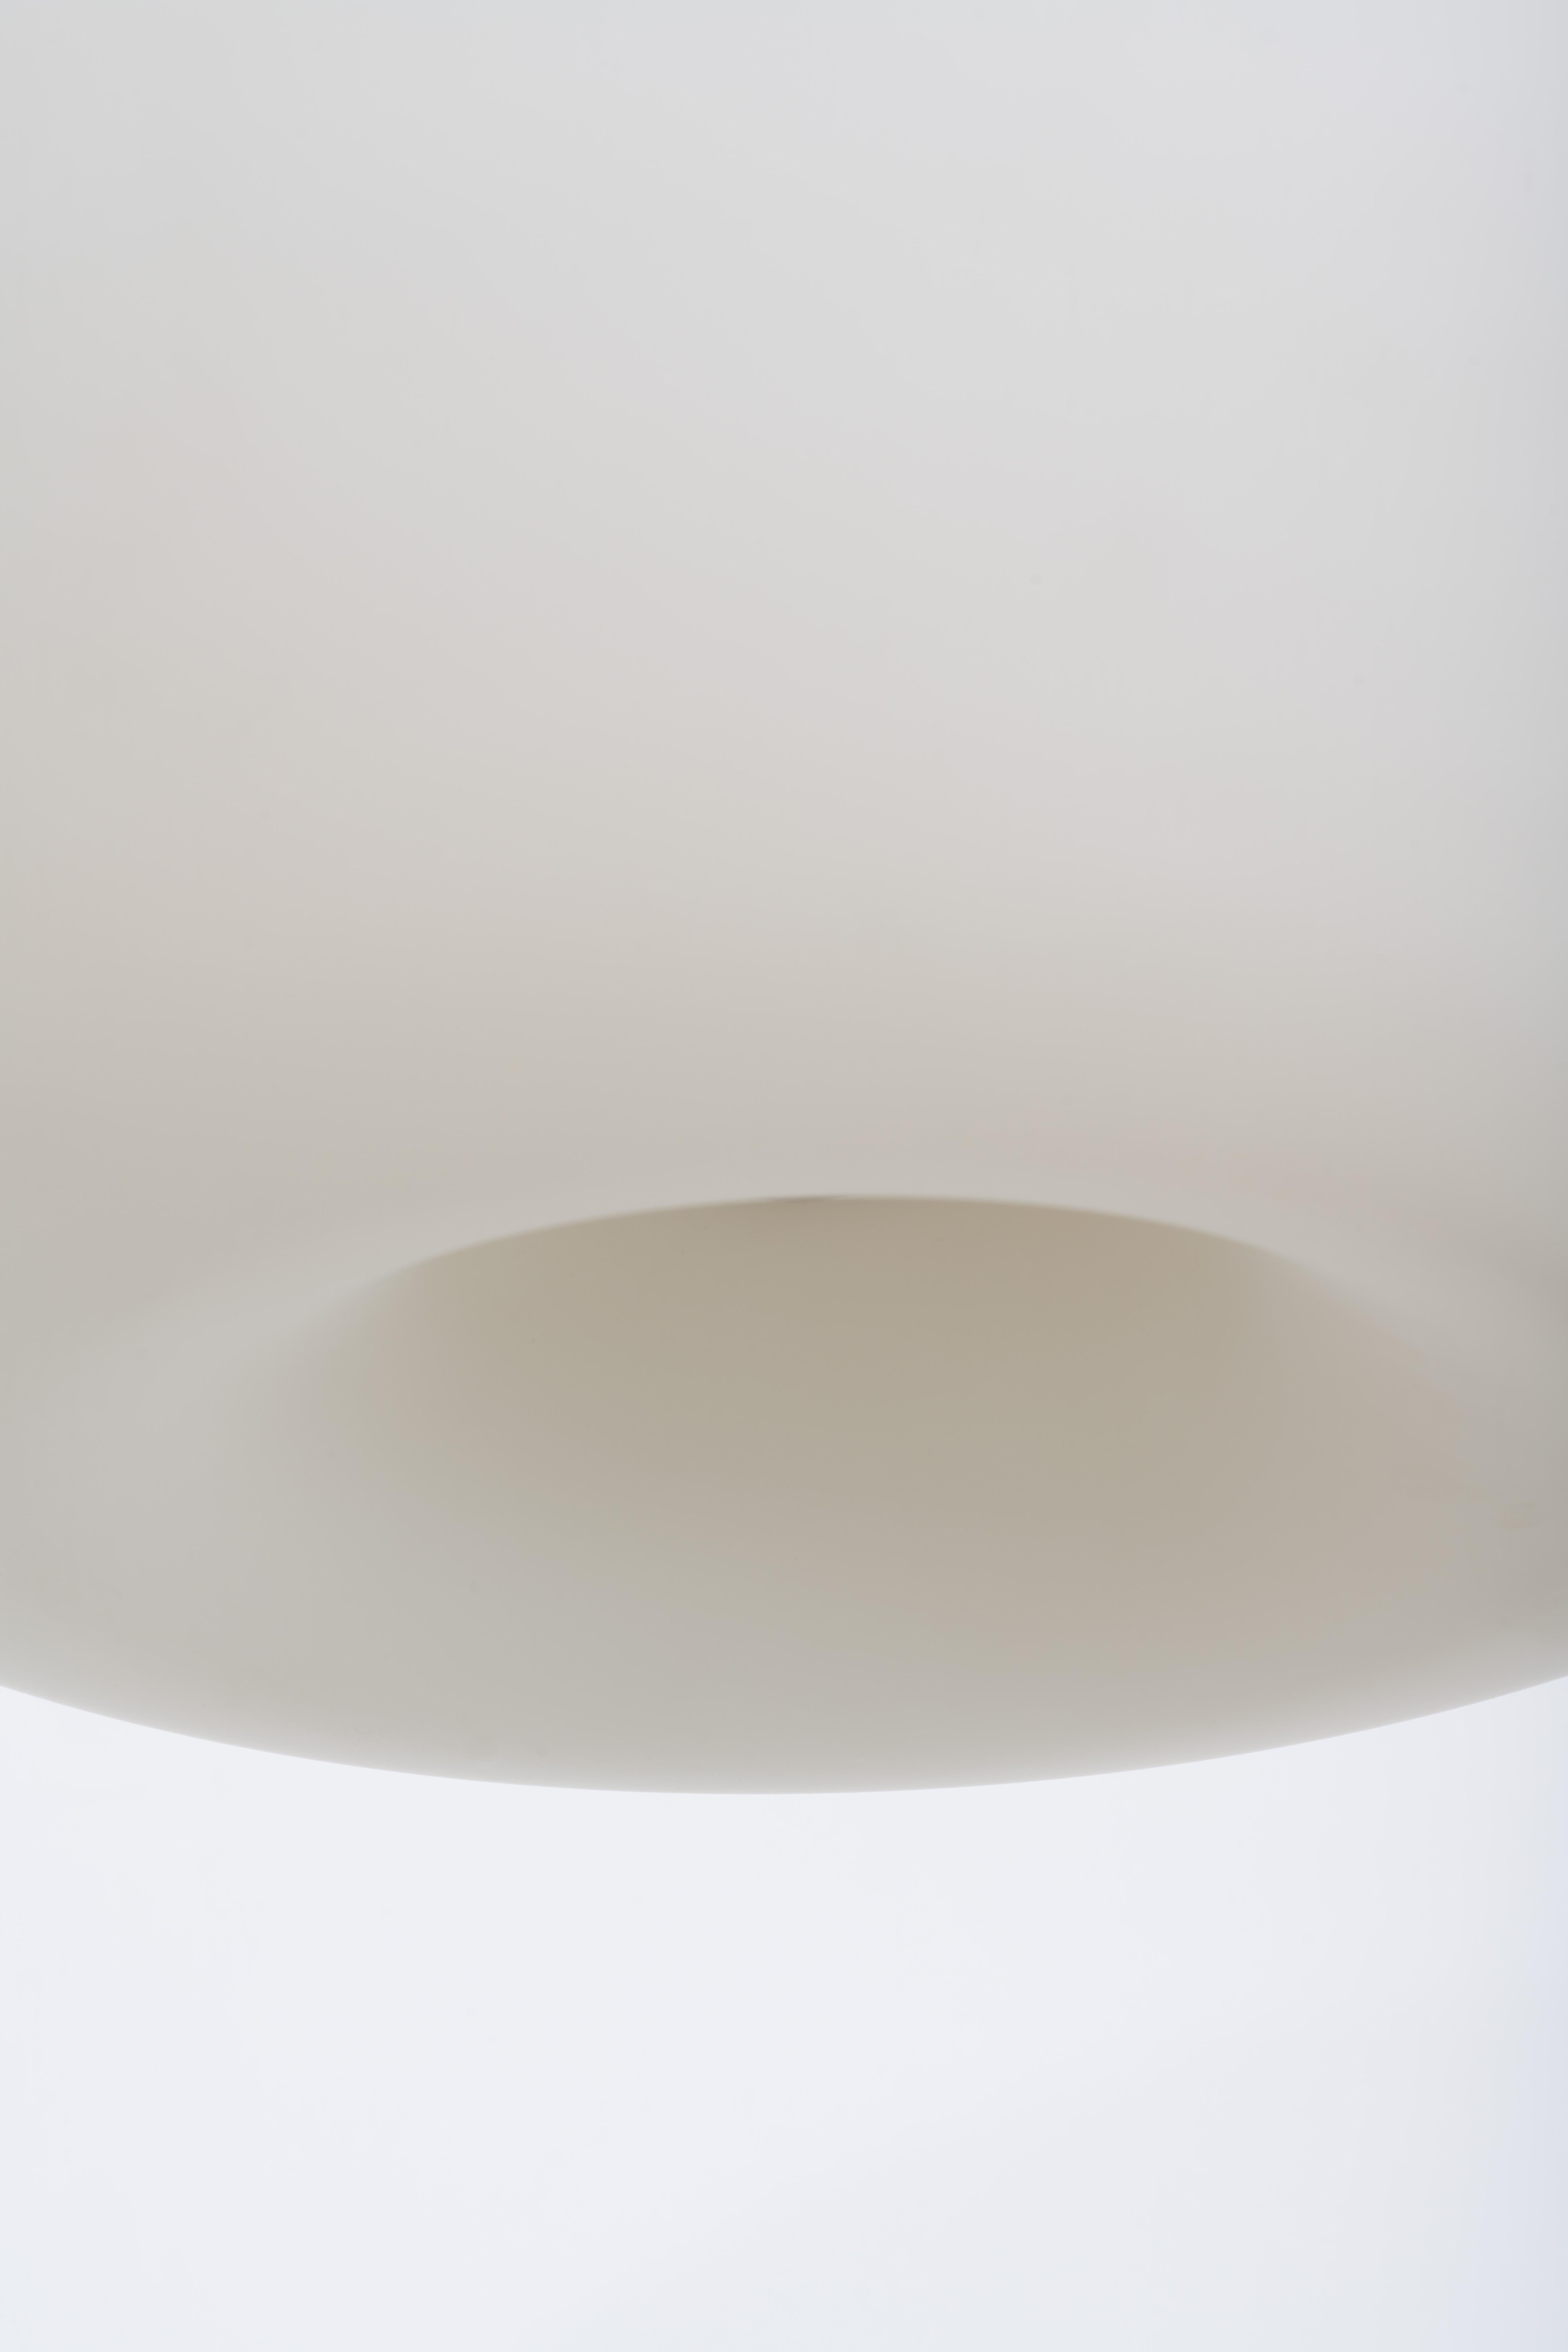 Lisa Johansson Pape-Ceiling lamp brass, opaline glass-Mid 20th Century In Fair Condition For Sale In Milano, Lombardia